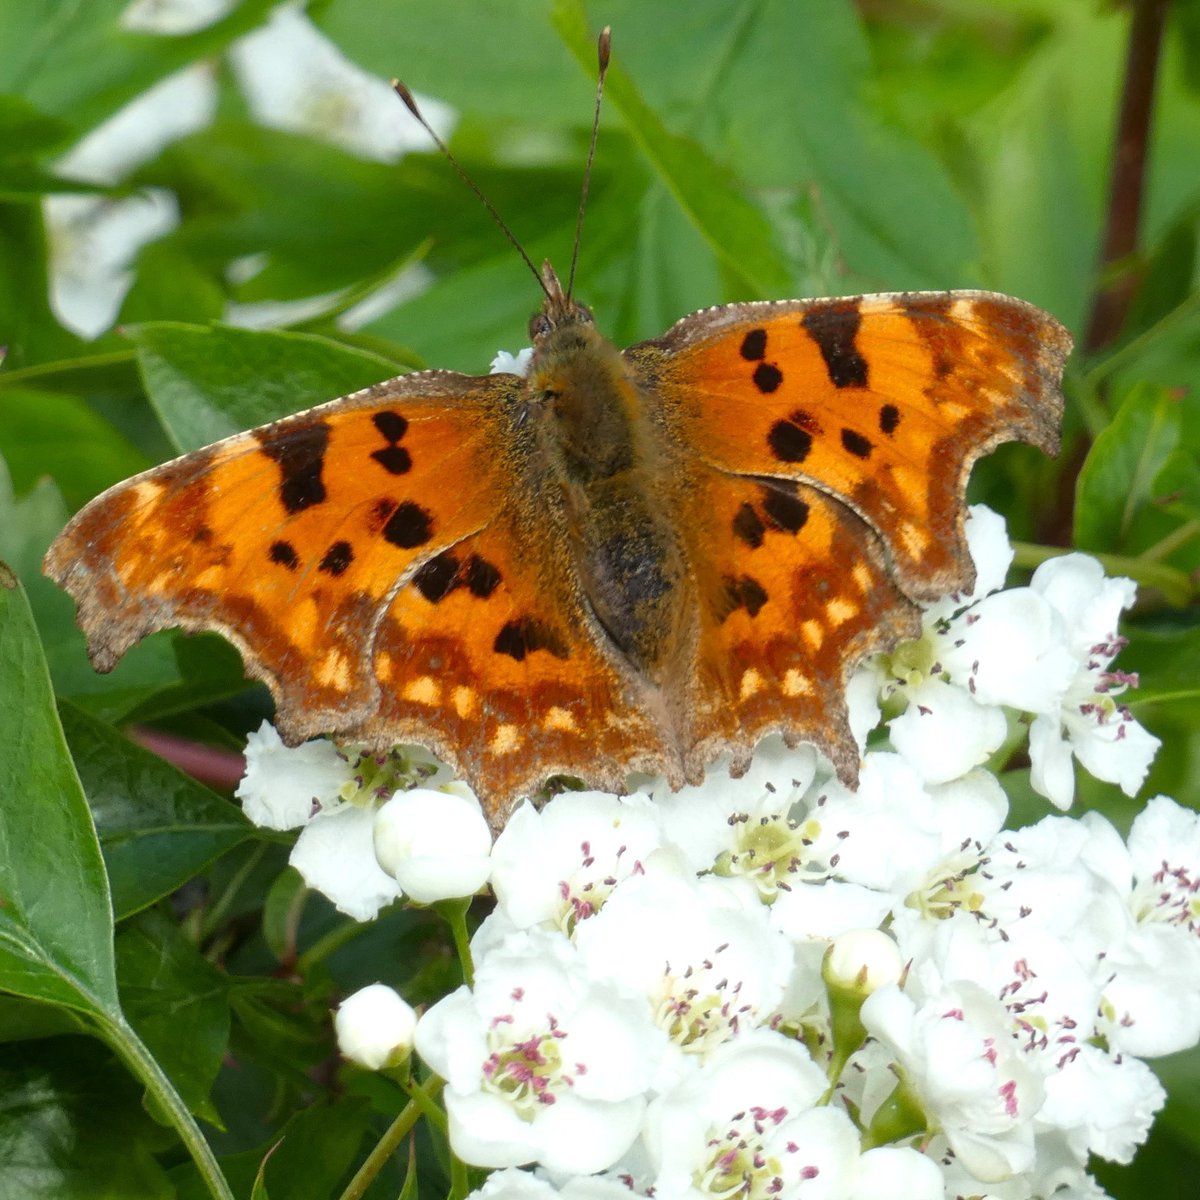 A Comma in Gillespie Park, North London late this afternoon @FinsParkFriends Colourful against spring flowers but also perfectly designed to enable safe hibernation amidst the leaves of autumn @savebutterflies @SaveLeaMarshes @KissimmeeWild @Britnatureguide